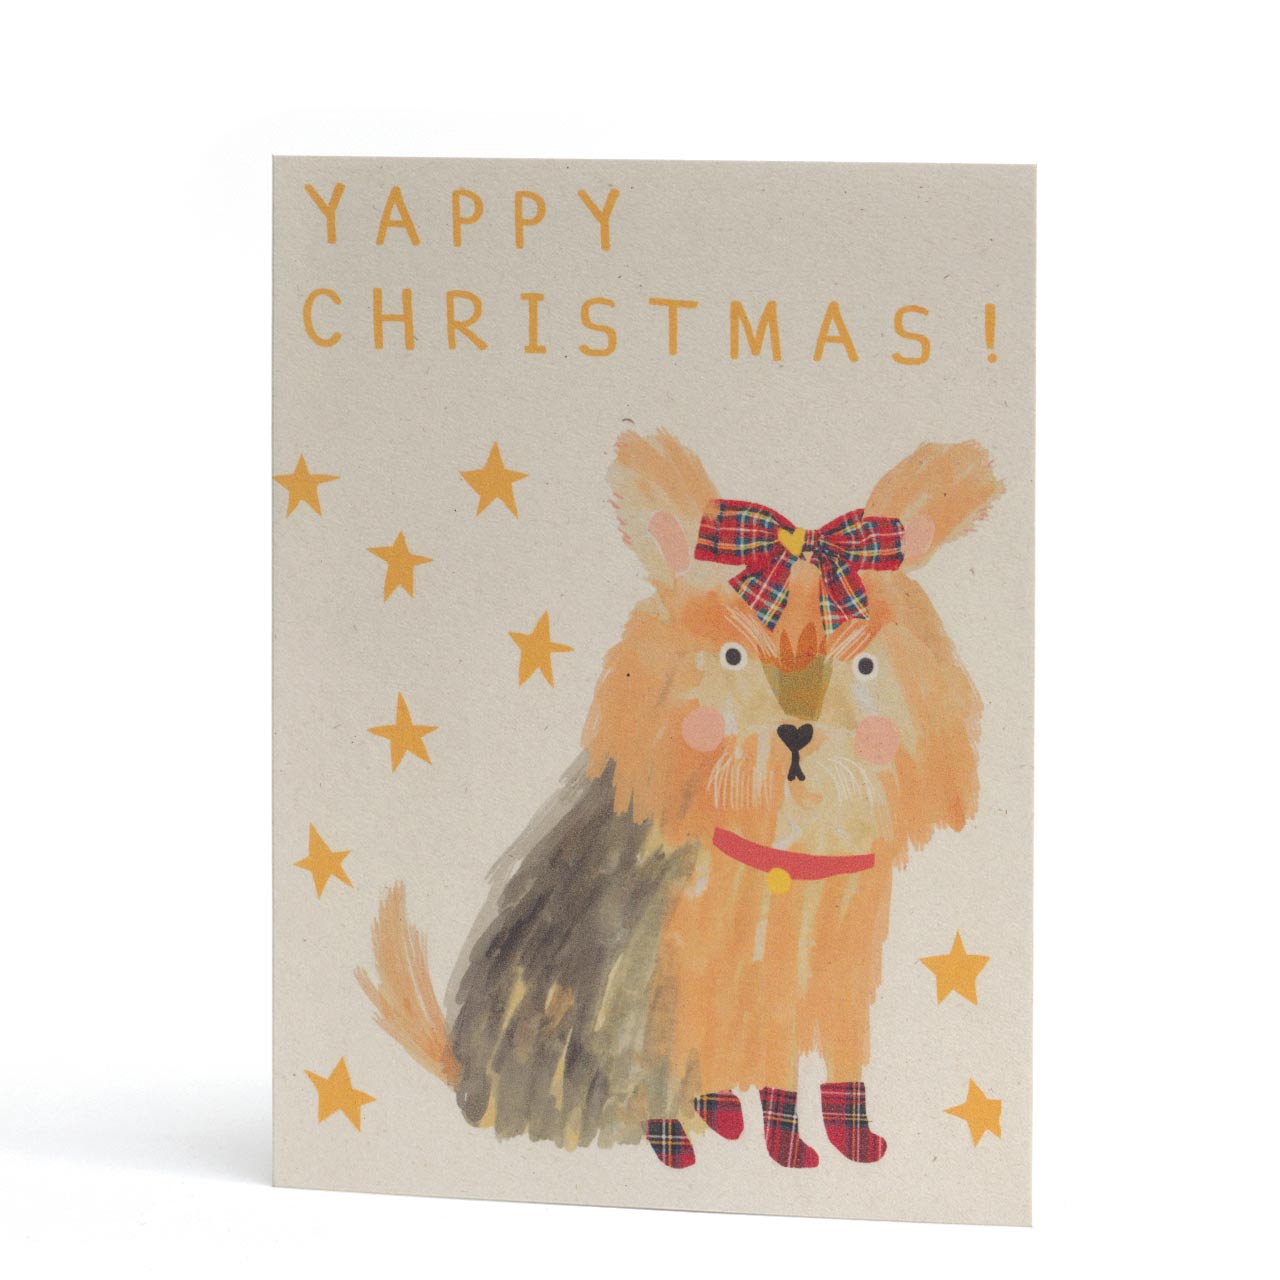 Yappy Christmas Terrier Greeting Card